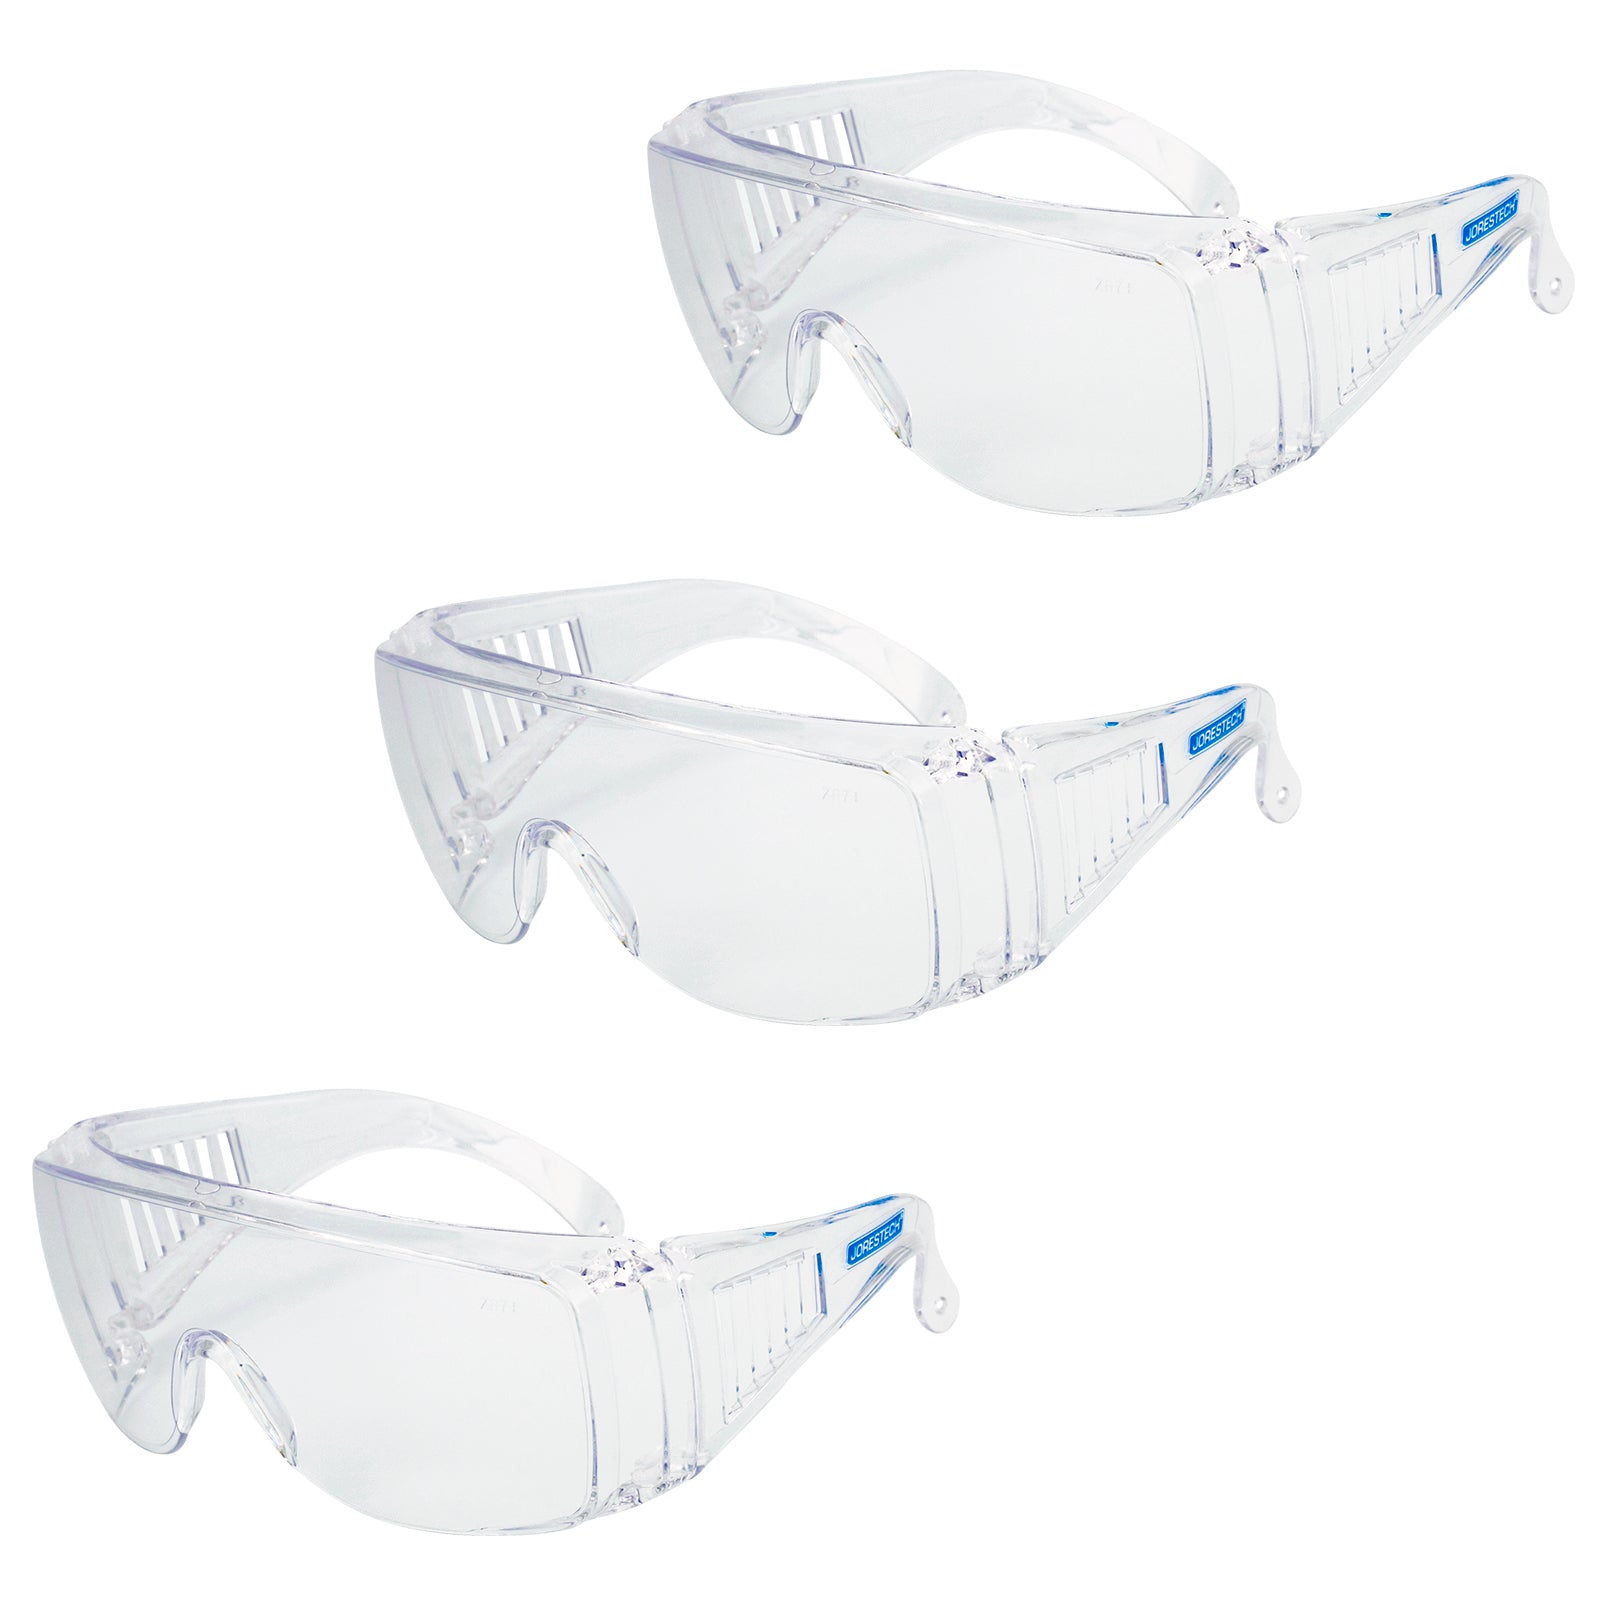 Pack of 3 clear Jorestech safety over-glasses for high impact protection on a white background